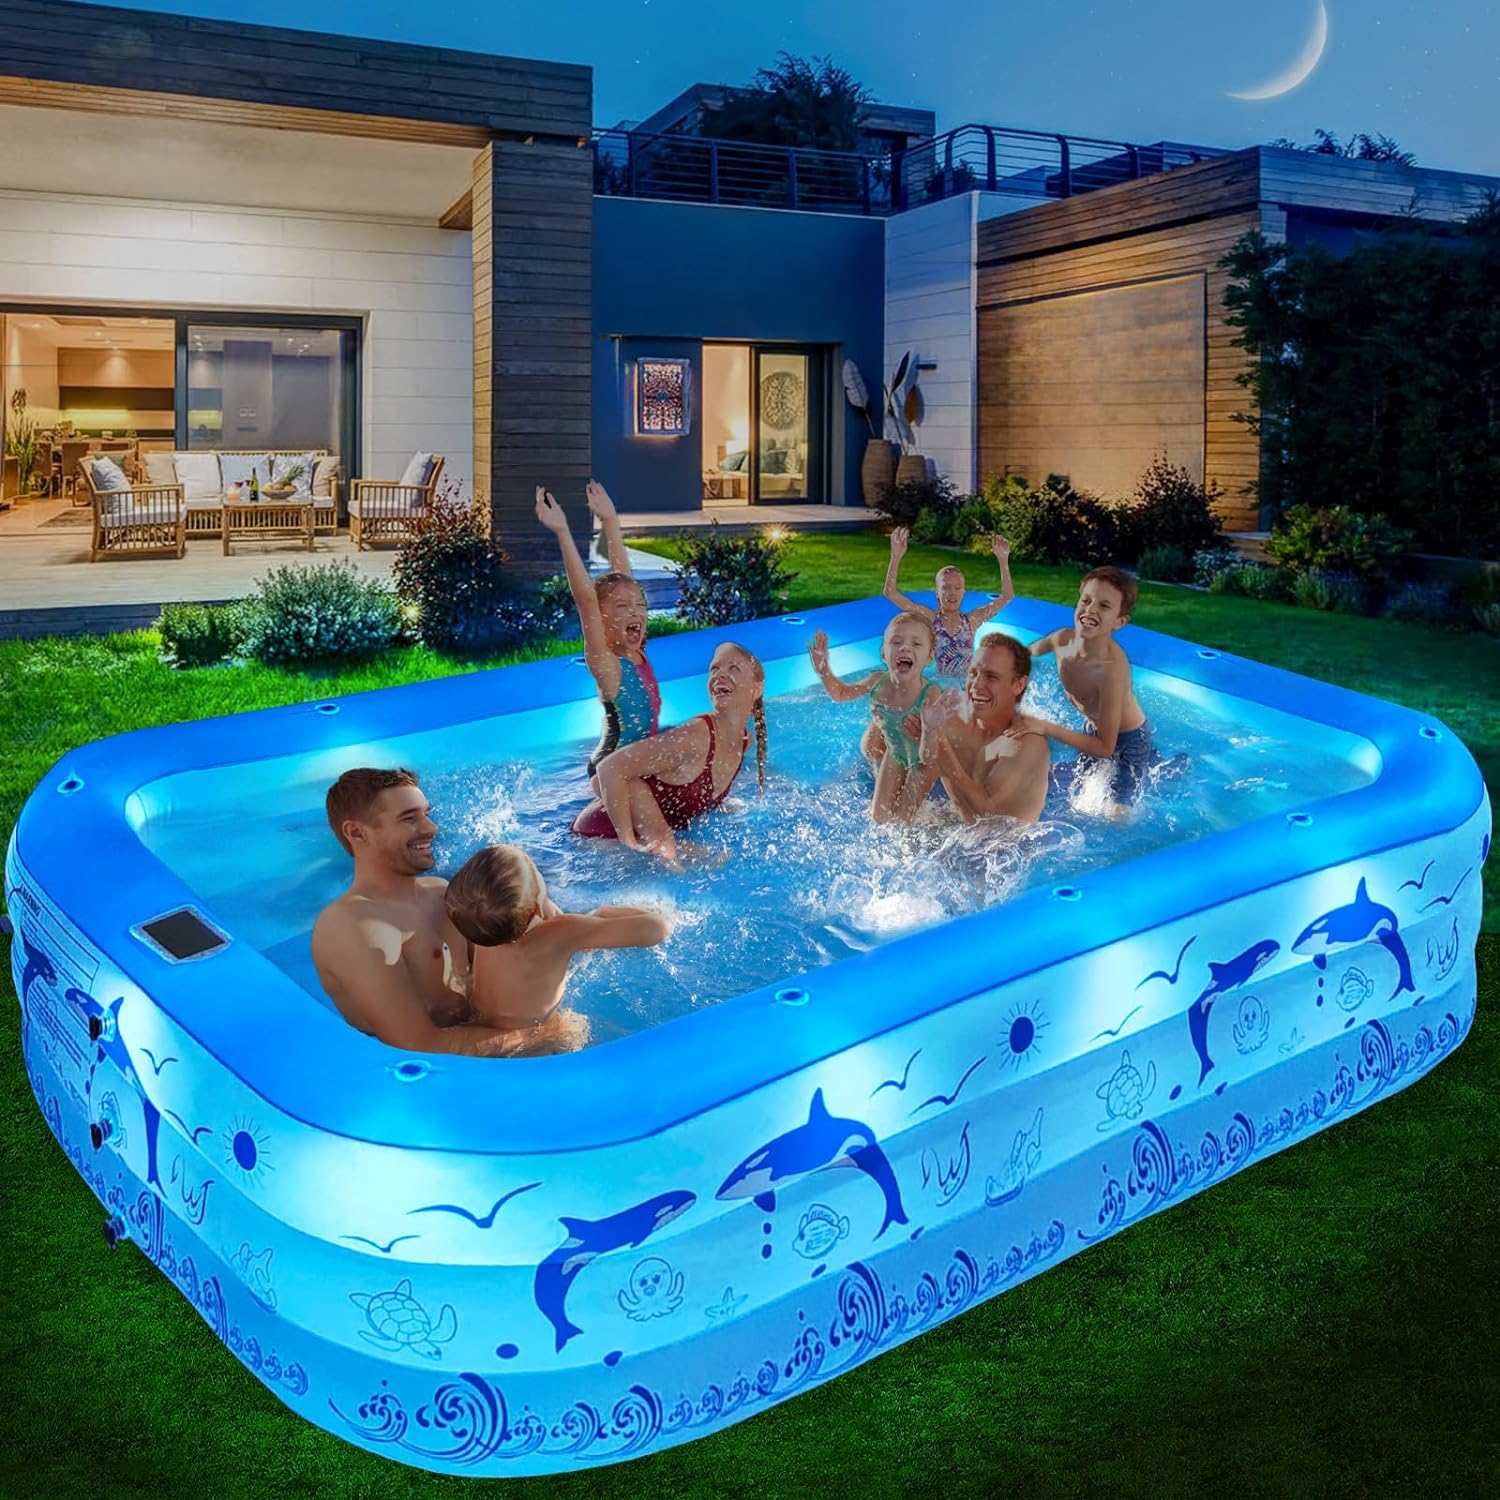 Best Inflatable Pool: Top Picks for Fun in the Sun